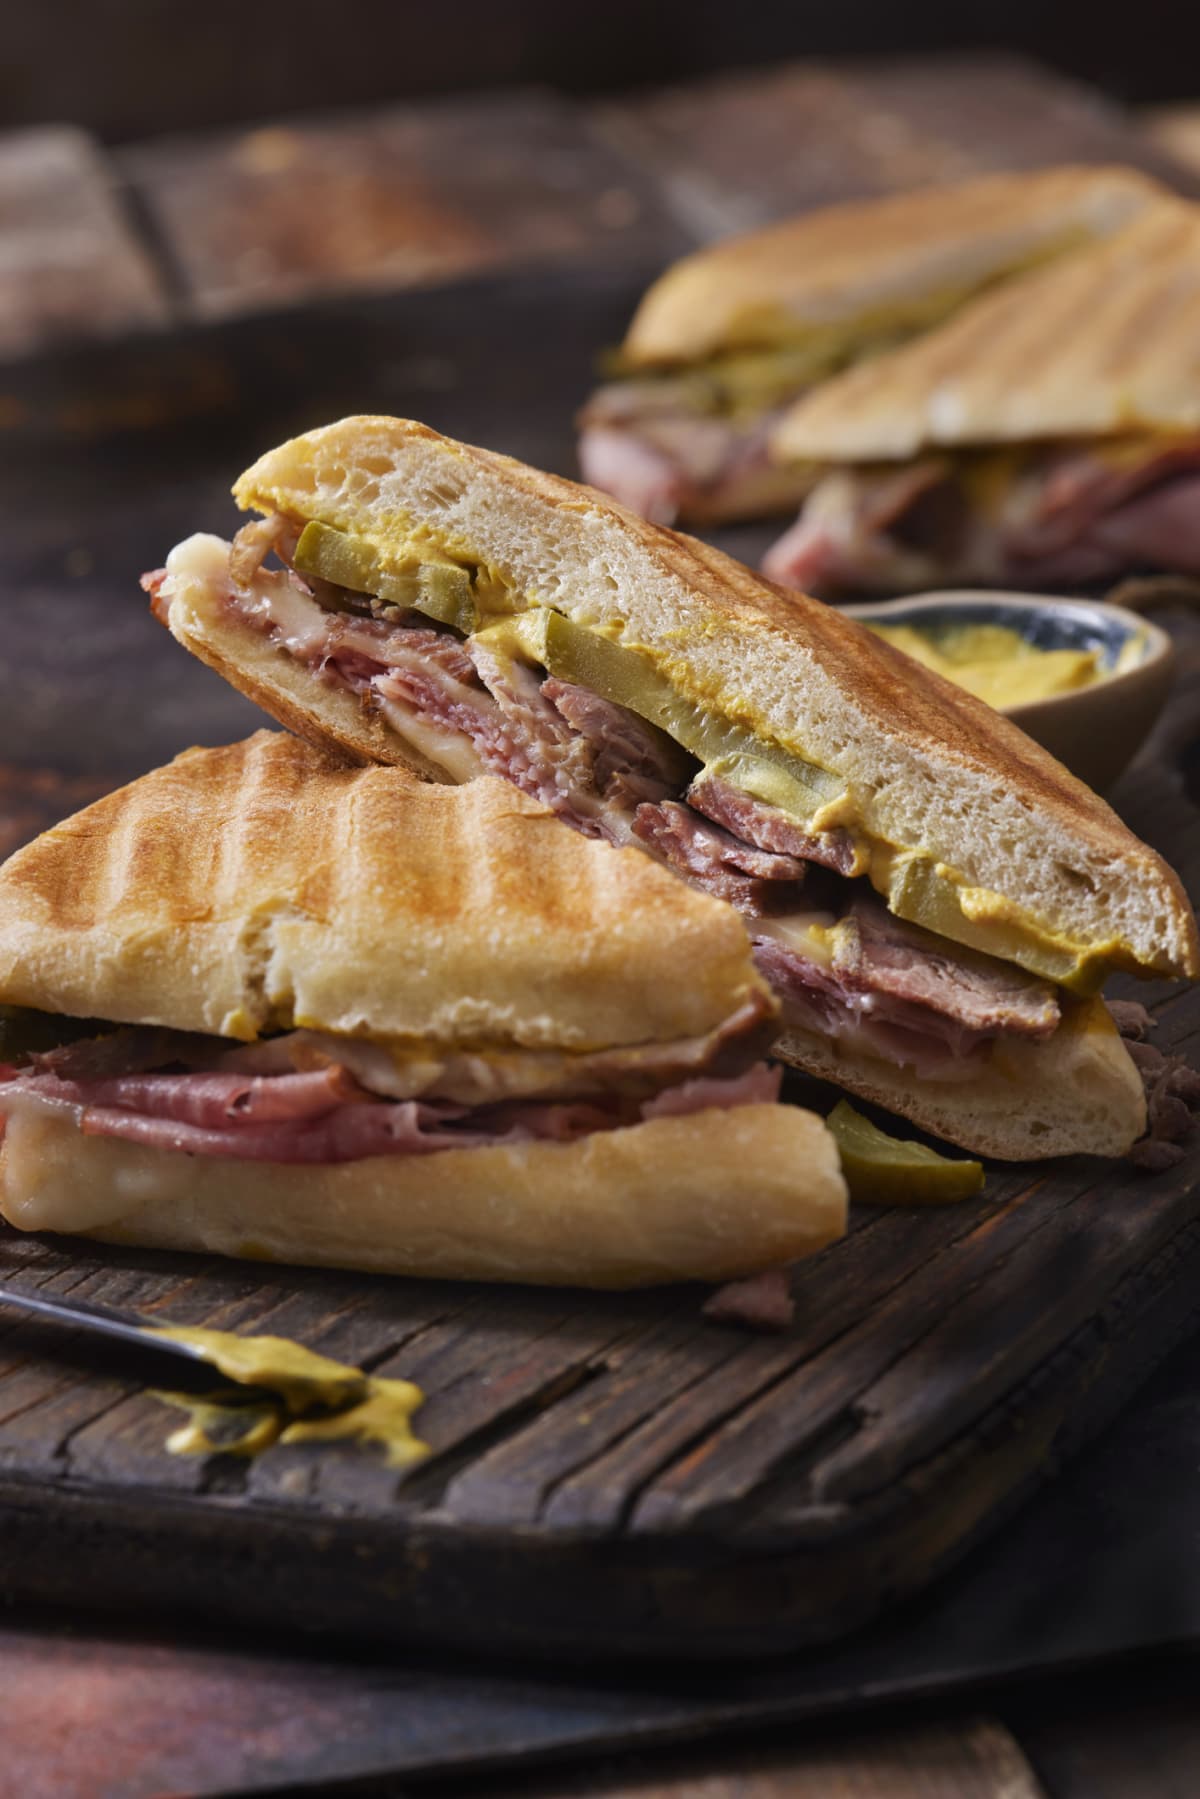 Classic Grilled Cuban Sandwich with Roast Pork, Honey Ham, Swiss Cheese, Dill Pickles and Mustard